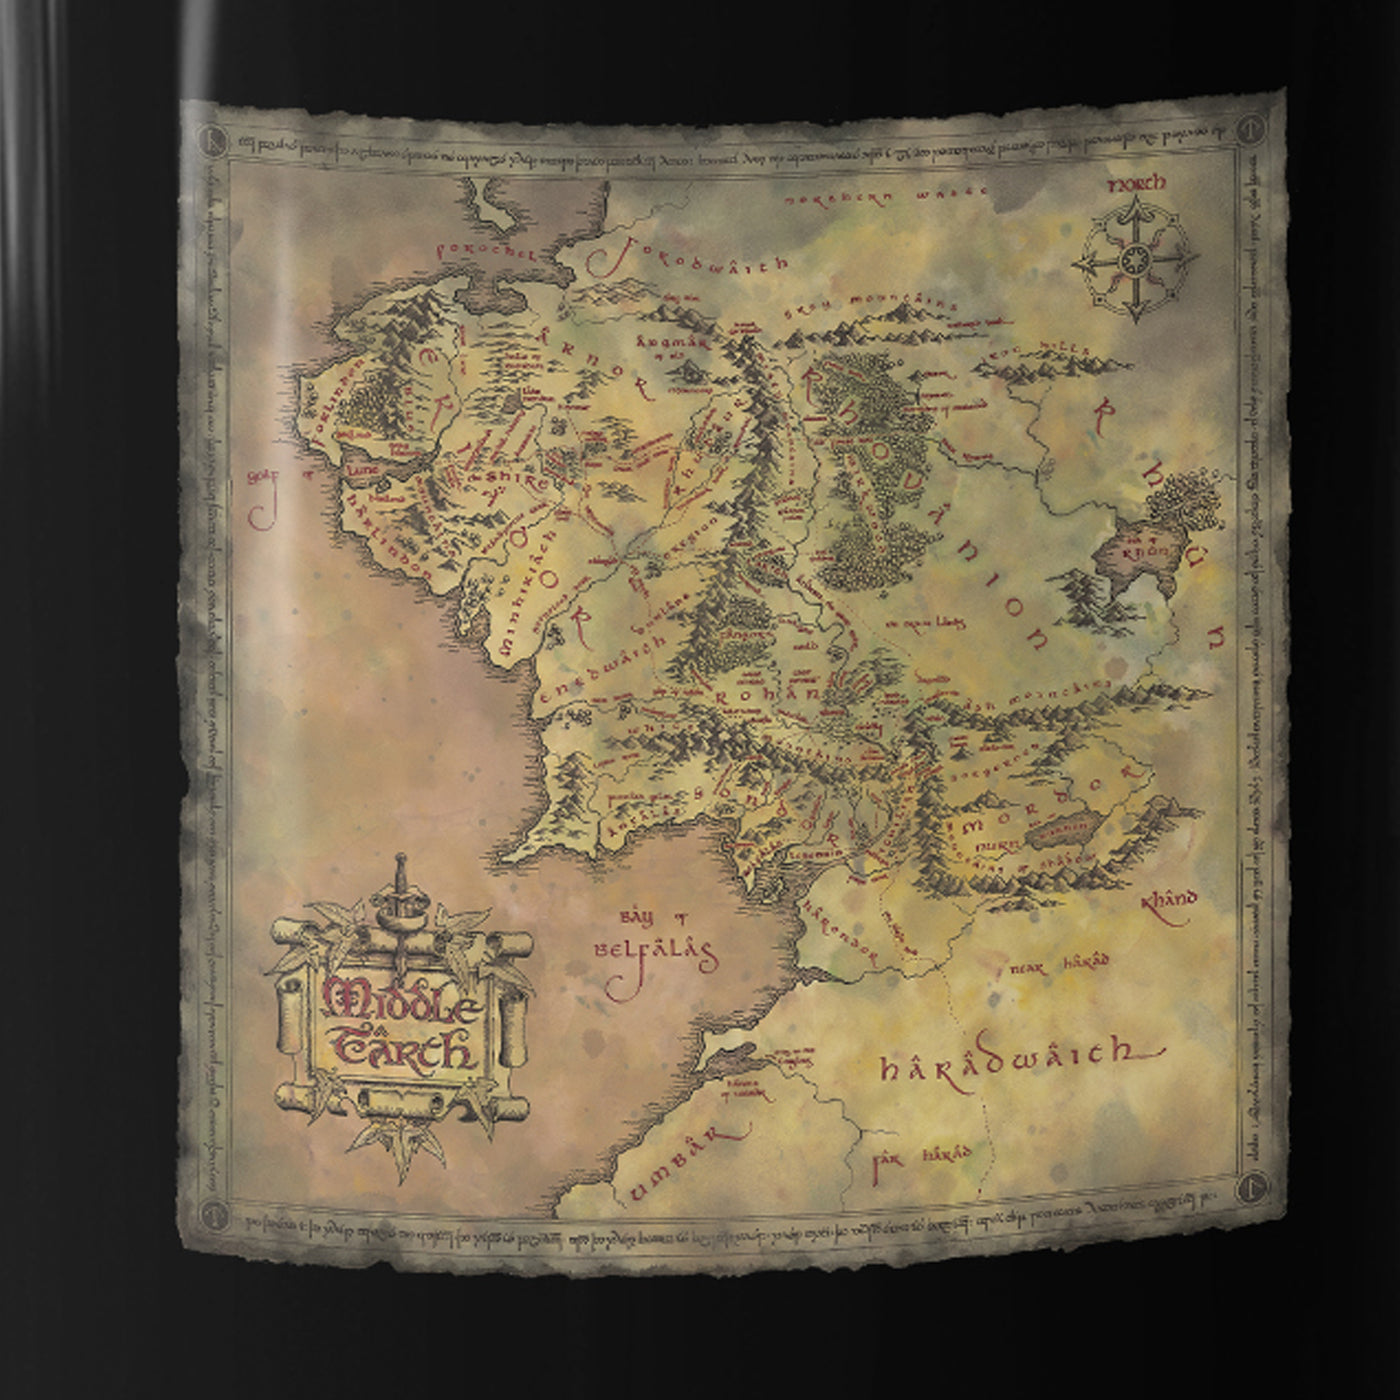 Lord Of The Rings Map Of Middle Earth Black Mug